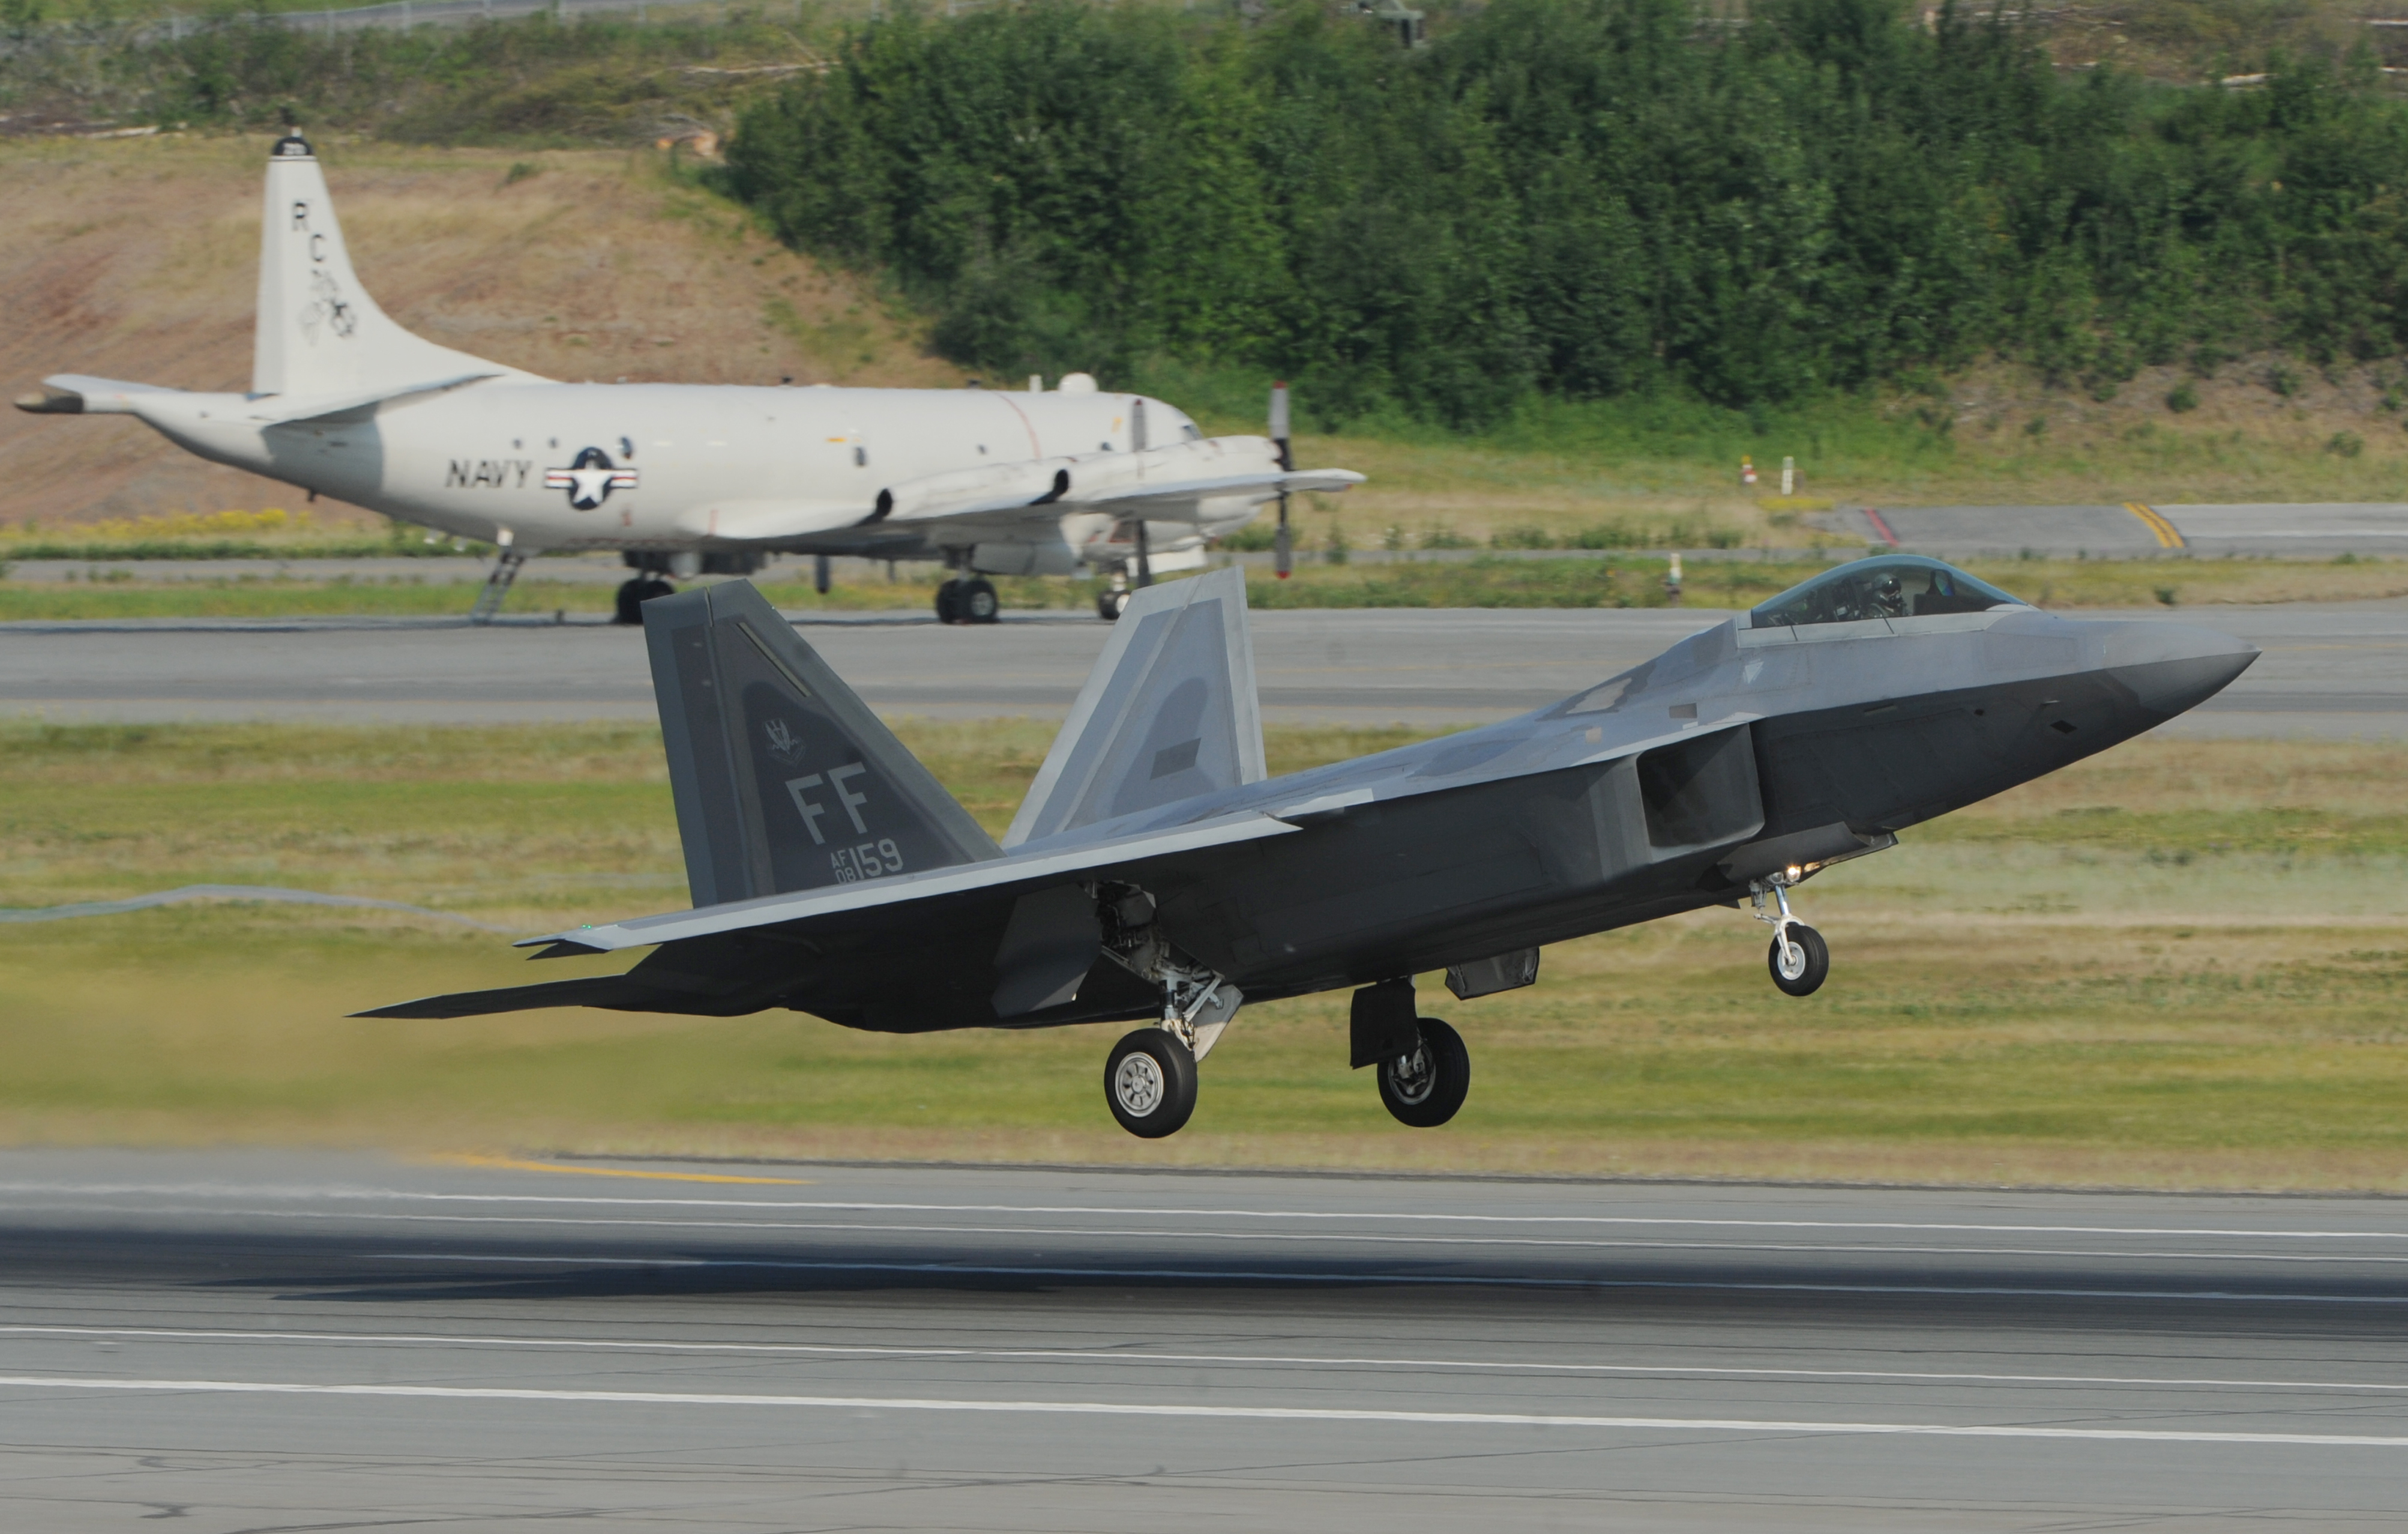 A F-22 Raptor from the 1st Fighter Squadron at Langley Air Force Base takes off from Joint Base Elmendorf-Richardson near Anchorage on Tuesday morning, June 23, 2015, while participating in Alaska's premier joint training exercise Northern Edge.  A Navy P-3 Orion is in the background. (Bill Roth / Alaska Dispatch News)